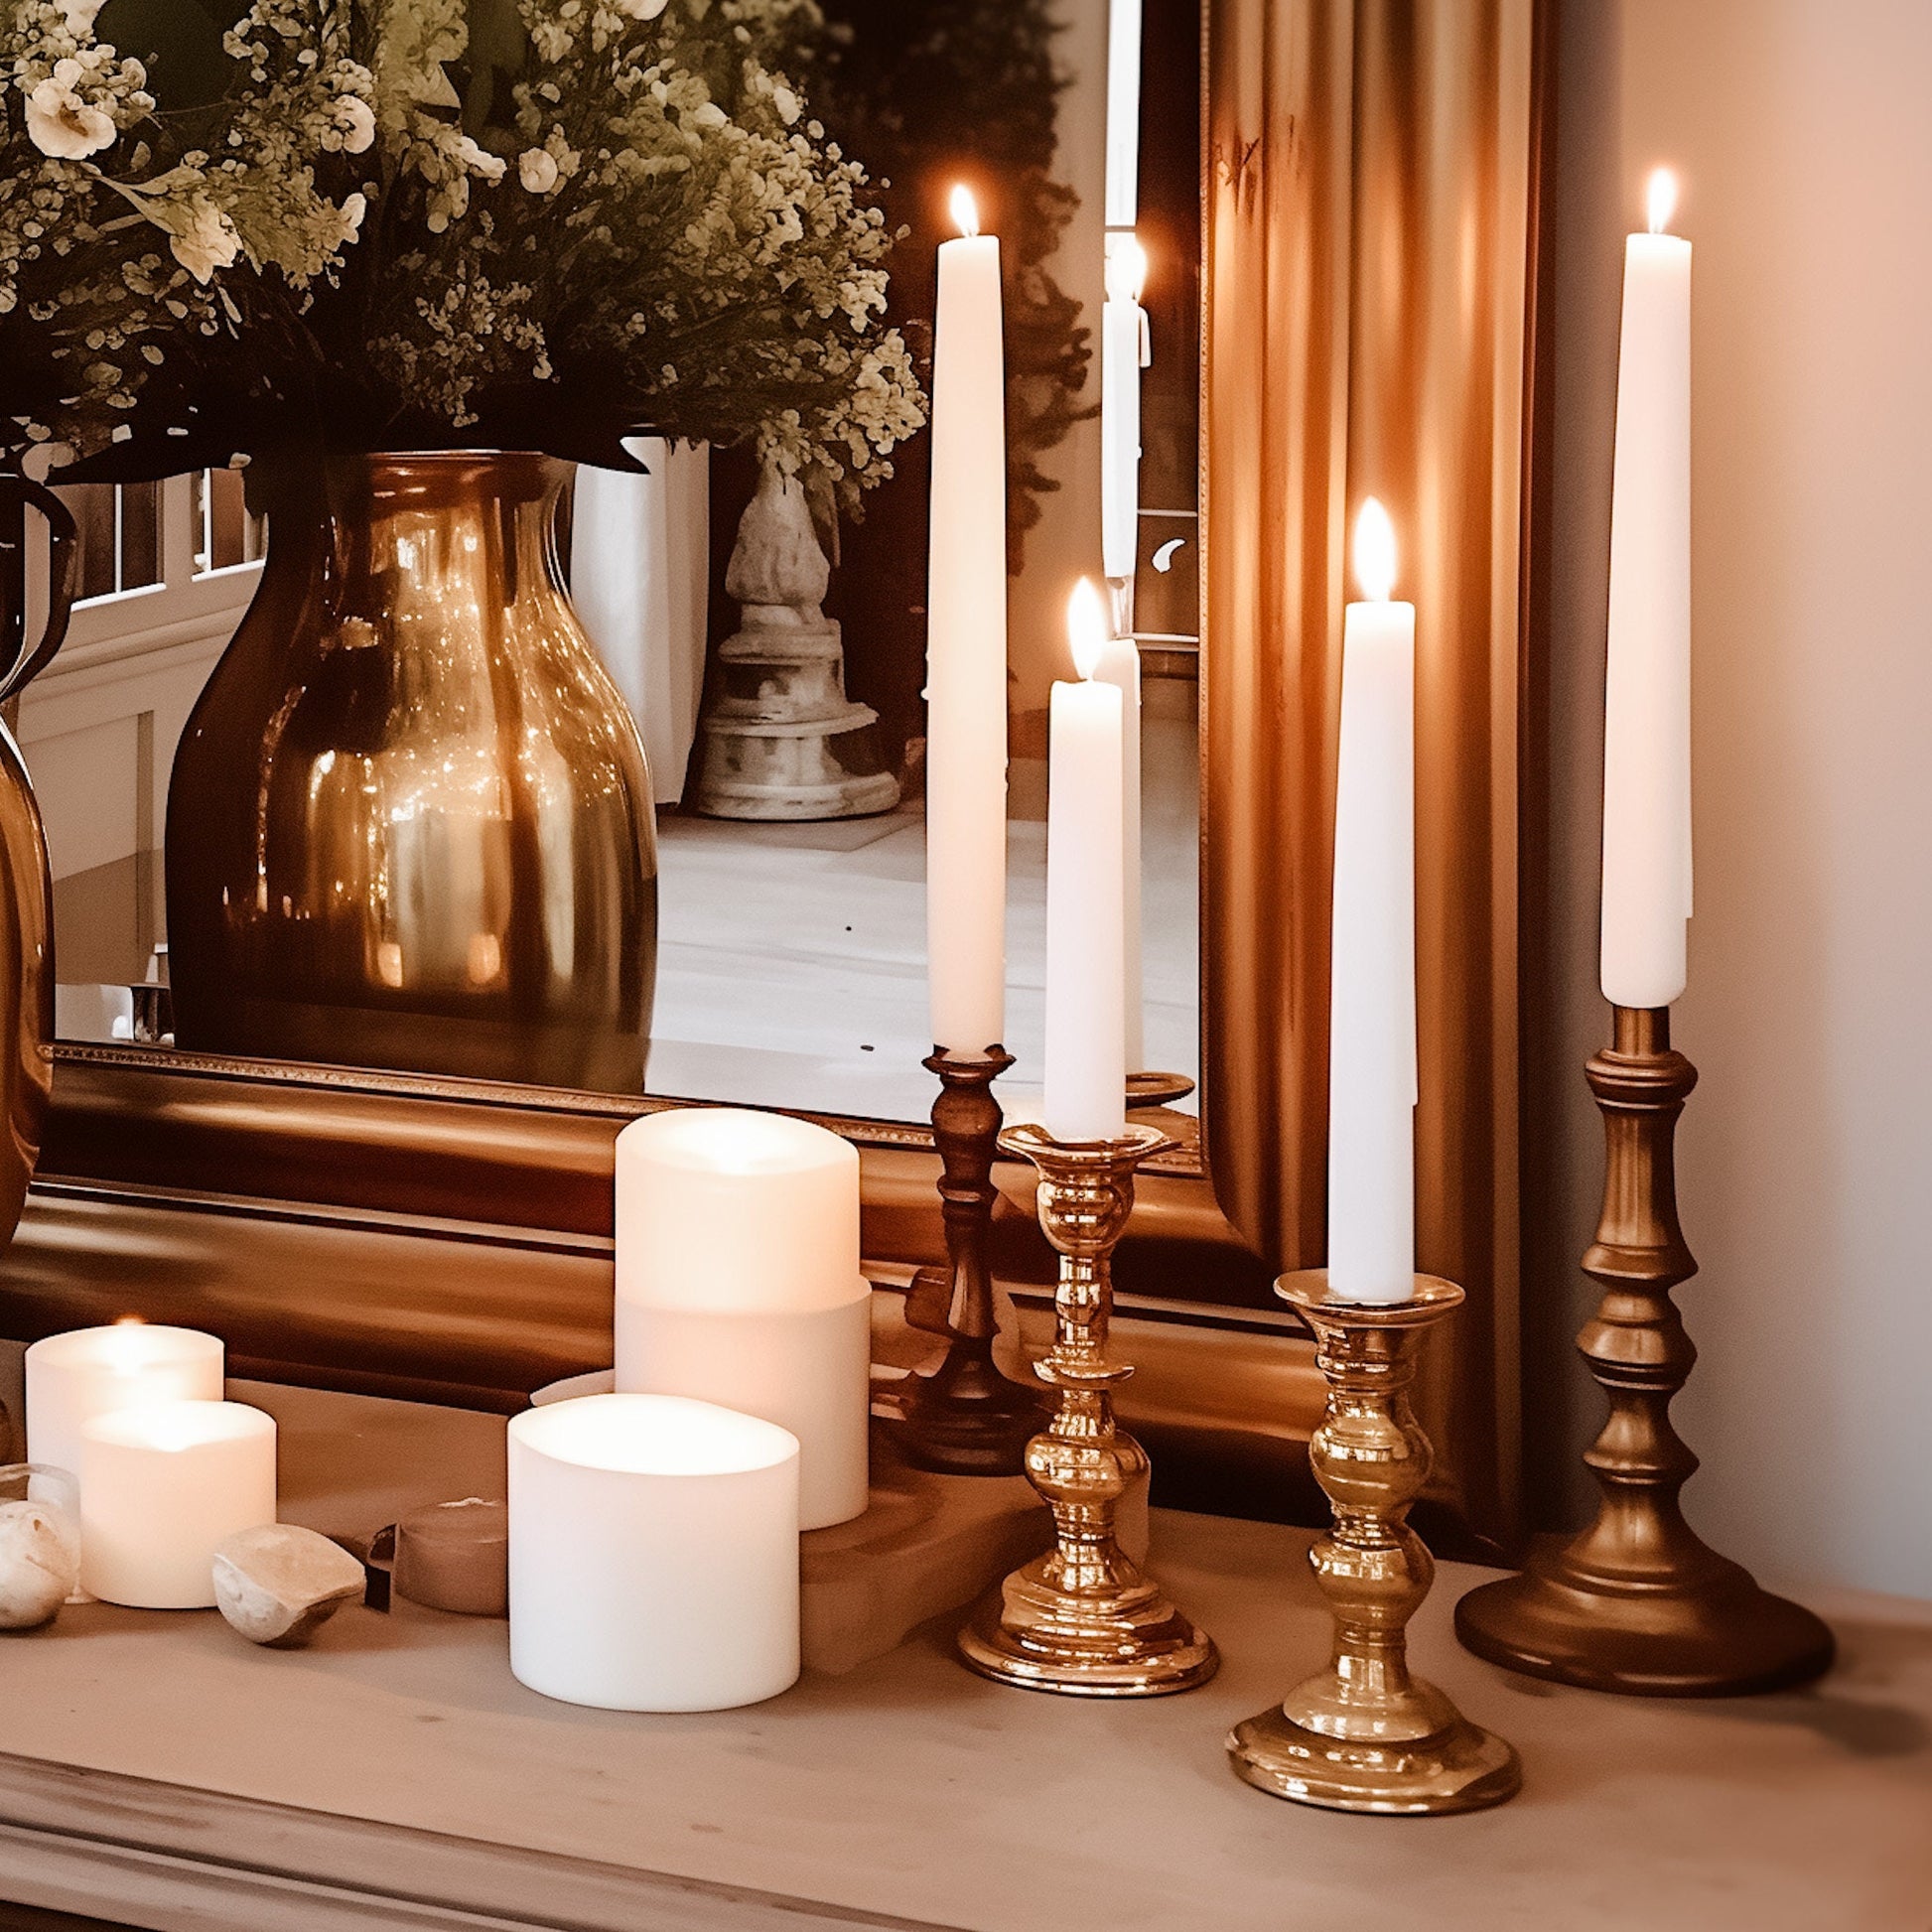 Eclectic Vintage Brass Candlestick Collection | Mismatched Sets for Holiday Decor